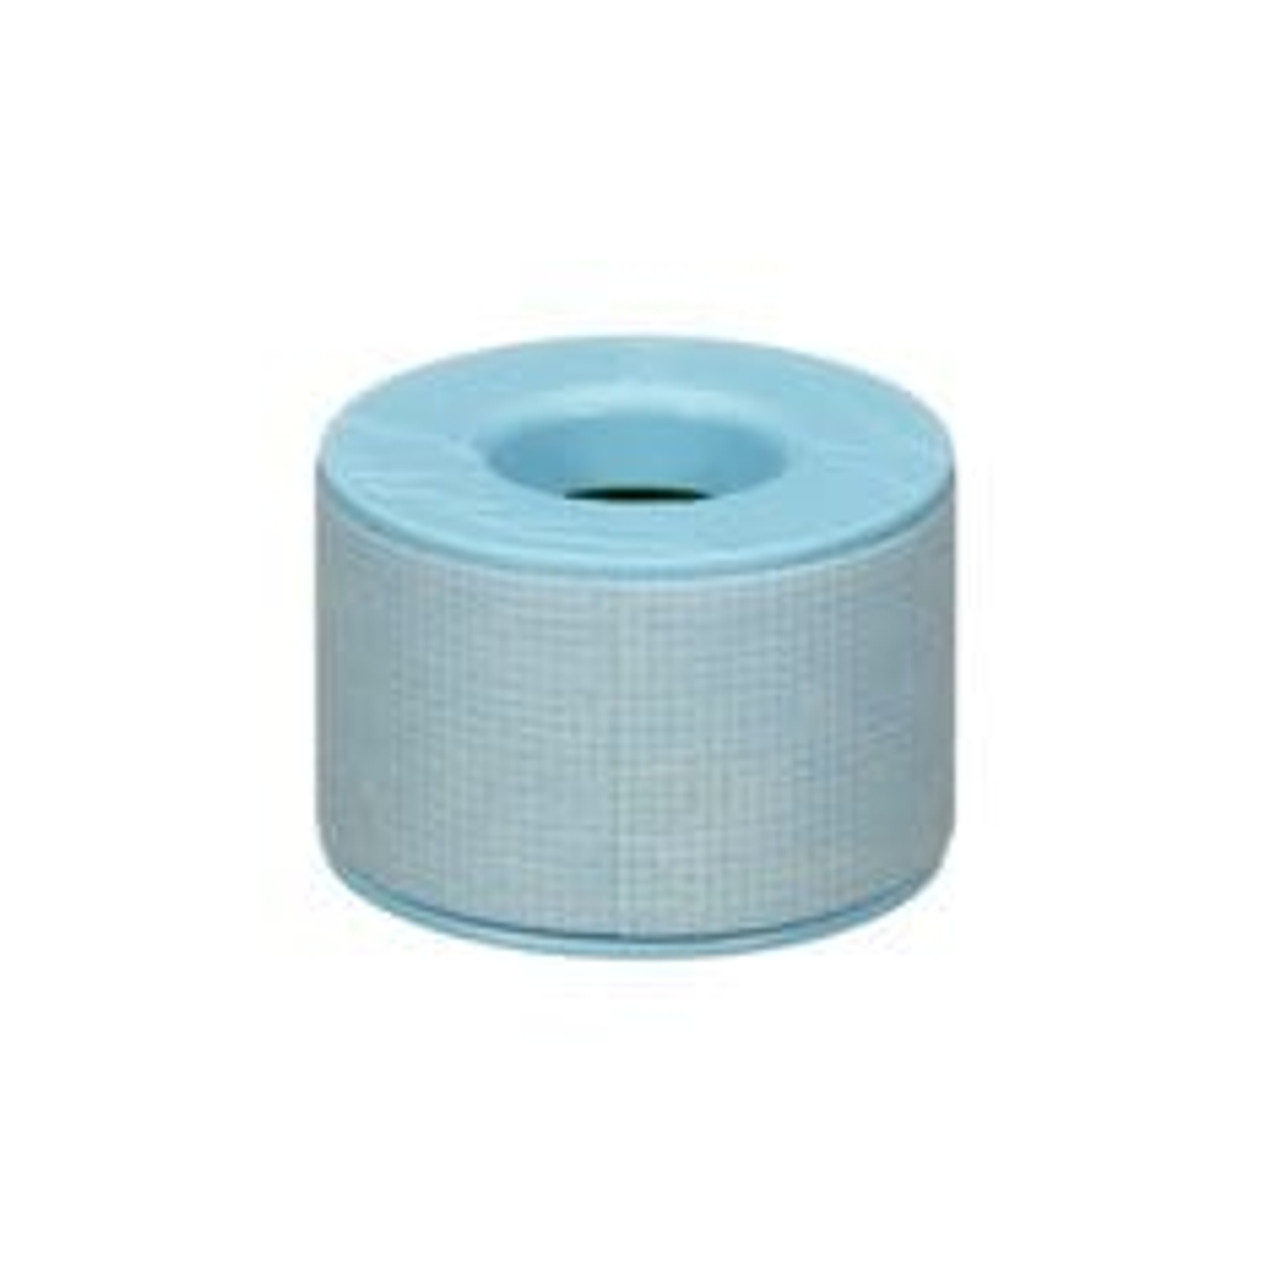 3M Micropore S Surgical Tape, 2770-1, 1 inch x 5.5 Yard (2.5 cm 5m), 12 Rolls/Box, 10 Boxes/Case 85161 Industrial Products & Supplies